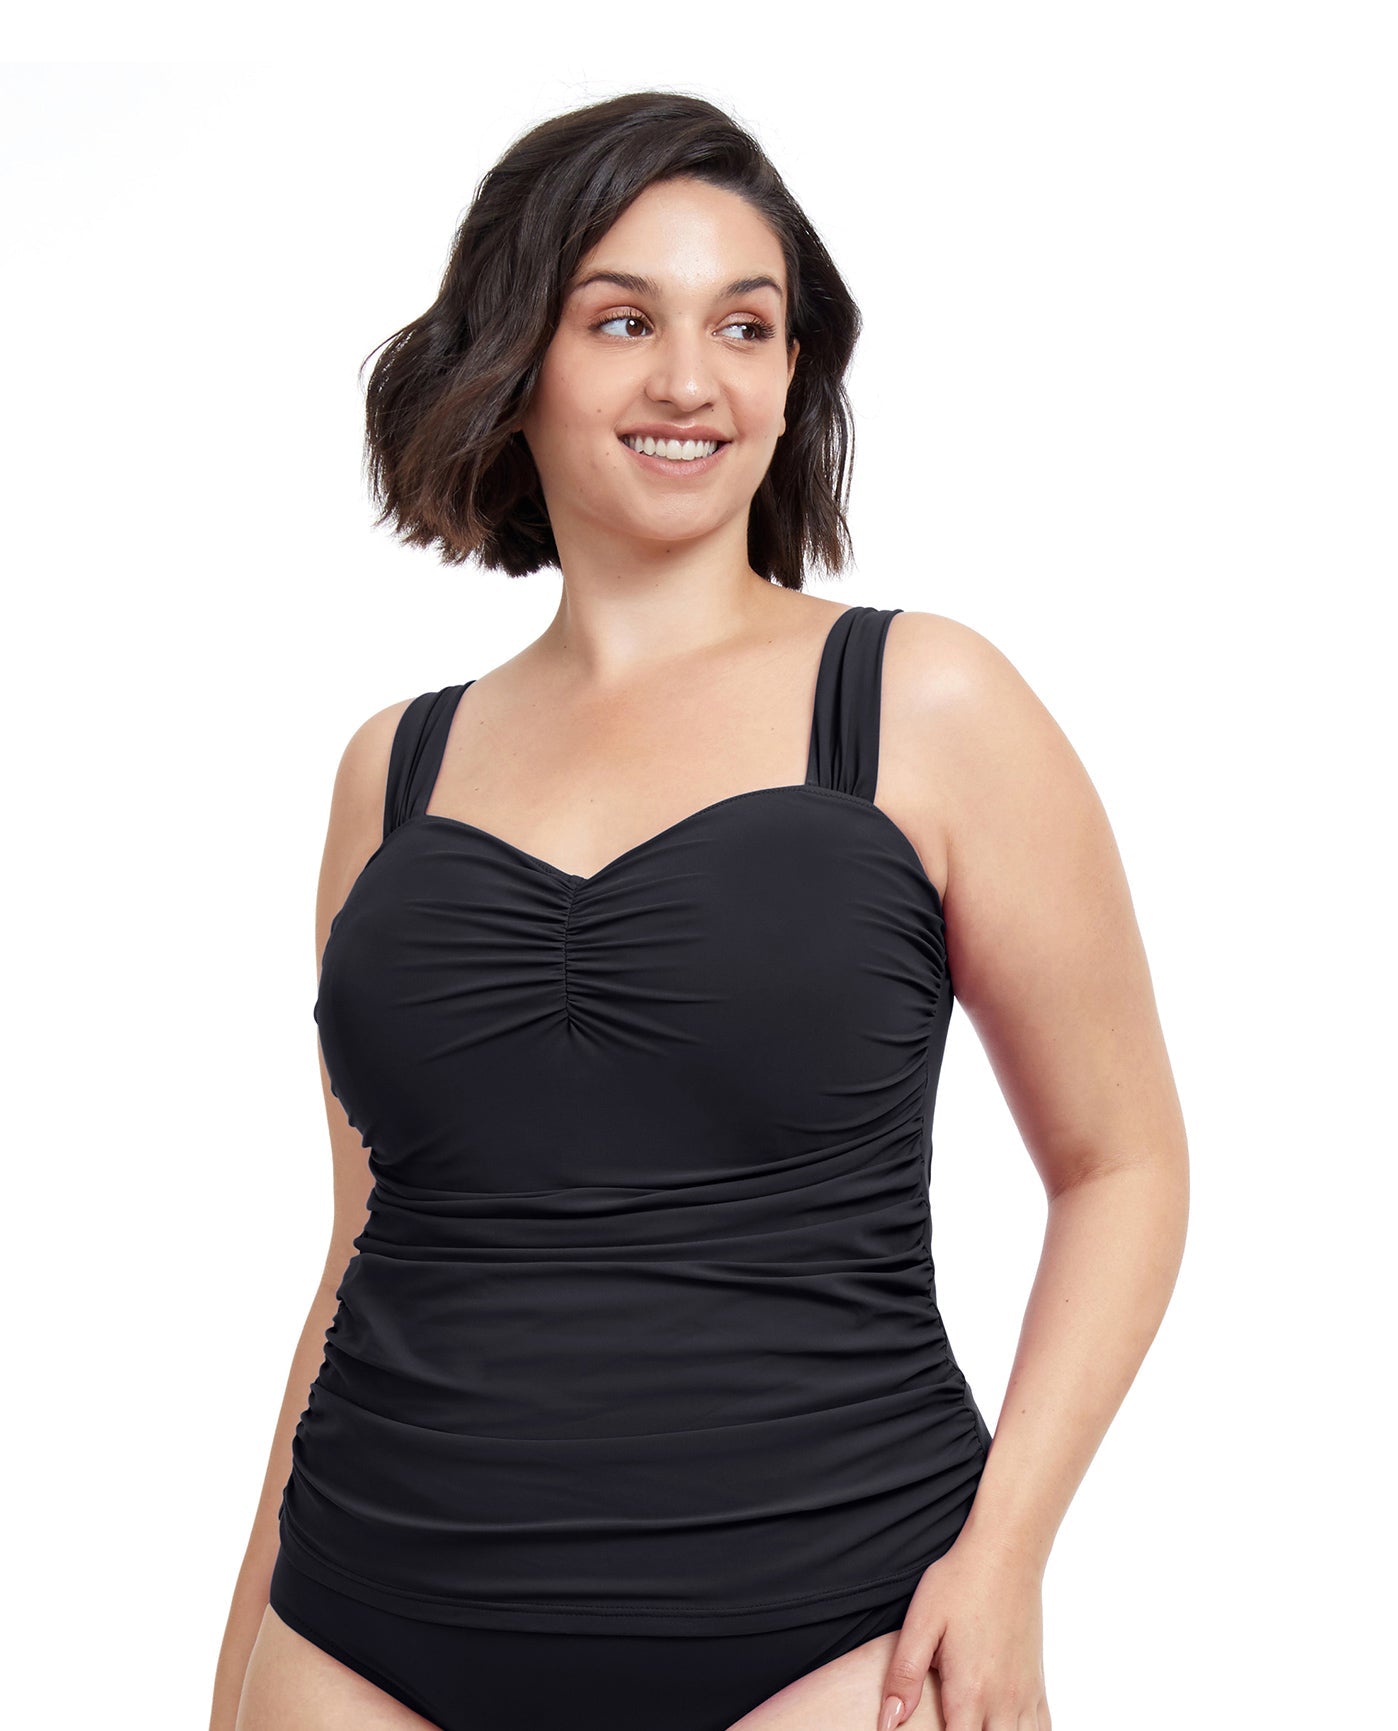 Swimsuits For All Plus Women's Bra Sized Sweetheart Underwire